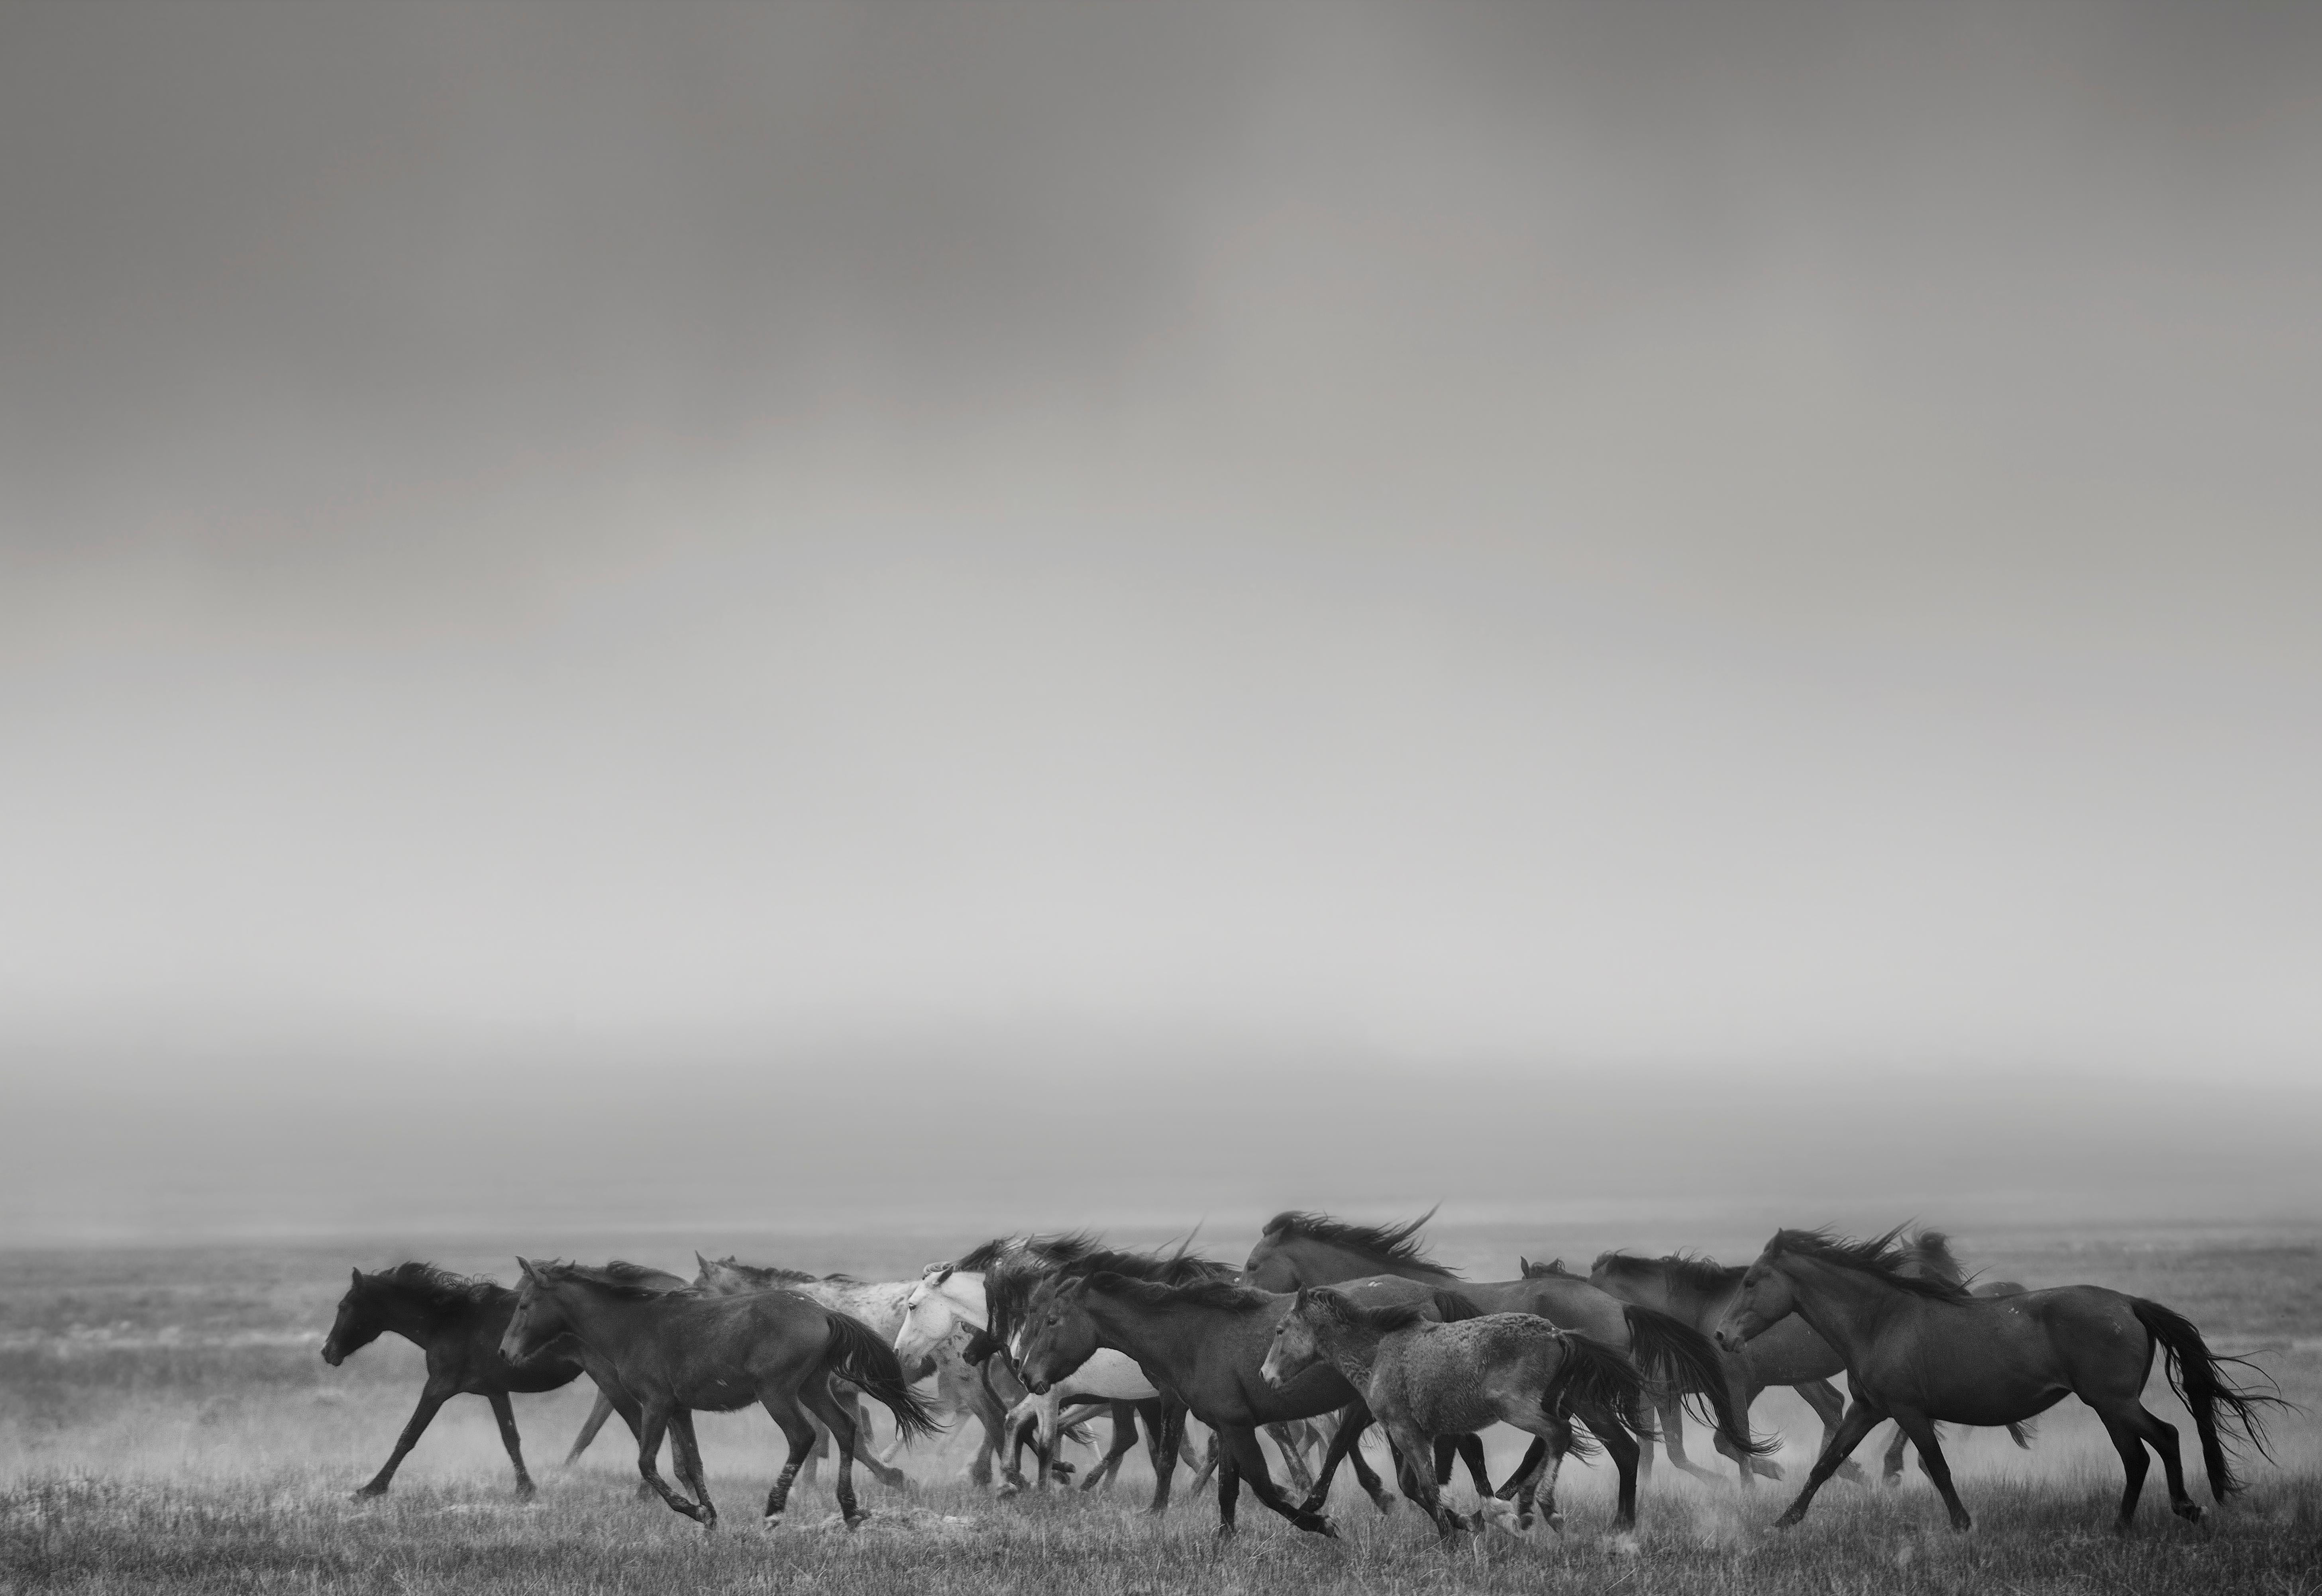 This is a black and white photograph of American Wild Mustangs by Shane Russeck. 
Printed on Archival Paper Using Archival ink
40x50 
Edition of 10
Signed and numbered

 Shane Russeck has built a reputation for capturing America's landscapes,